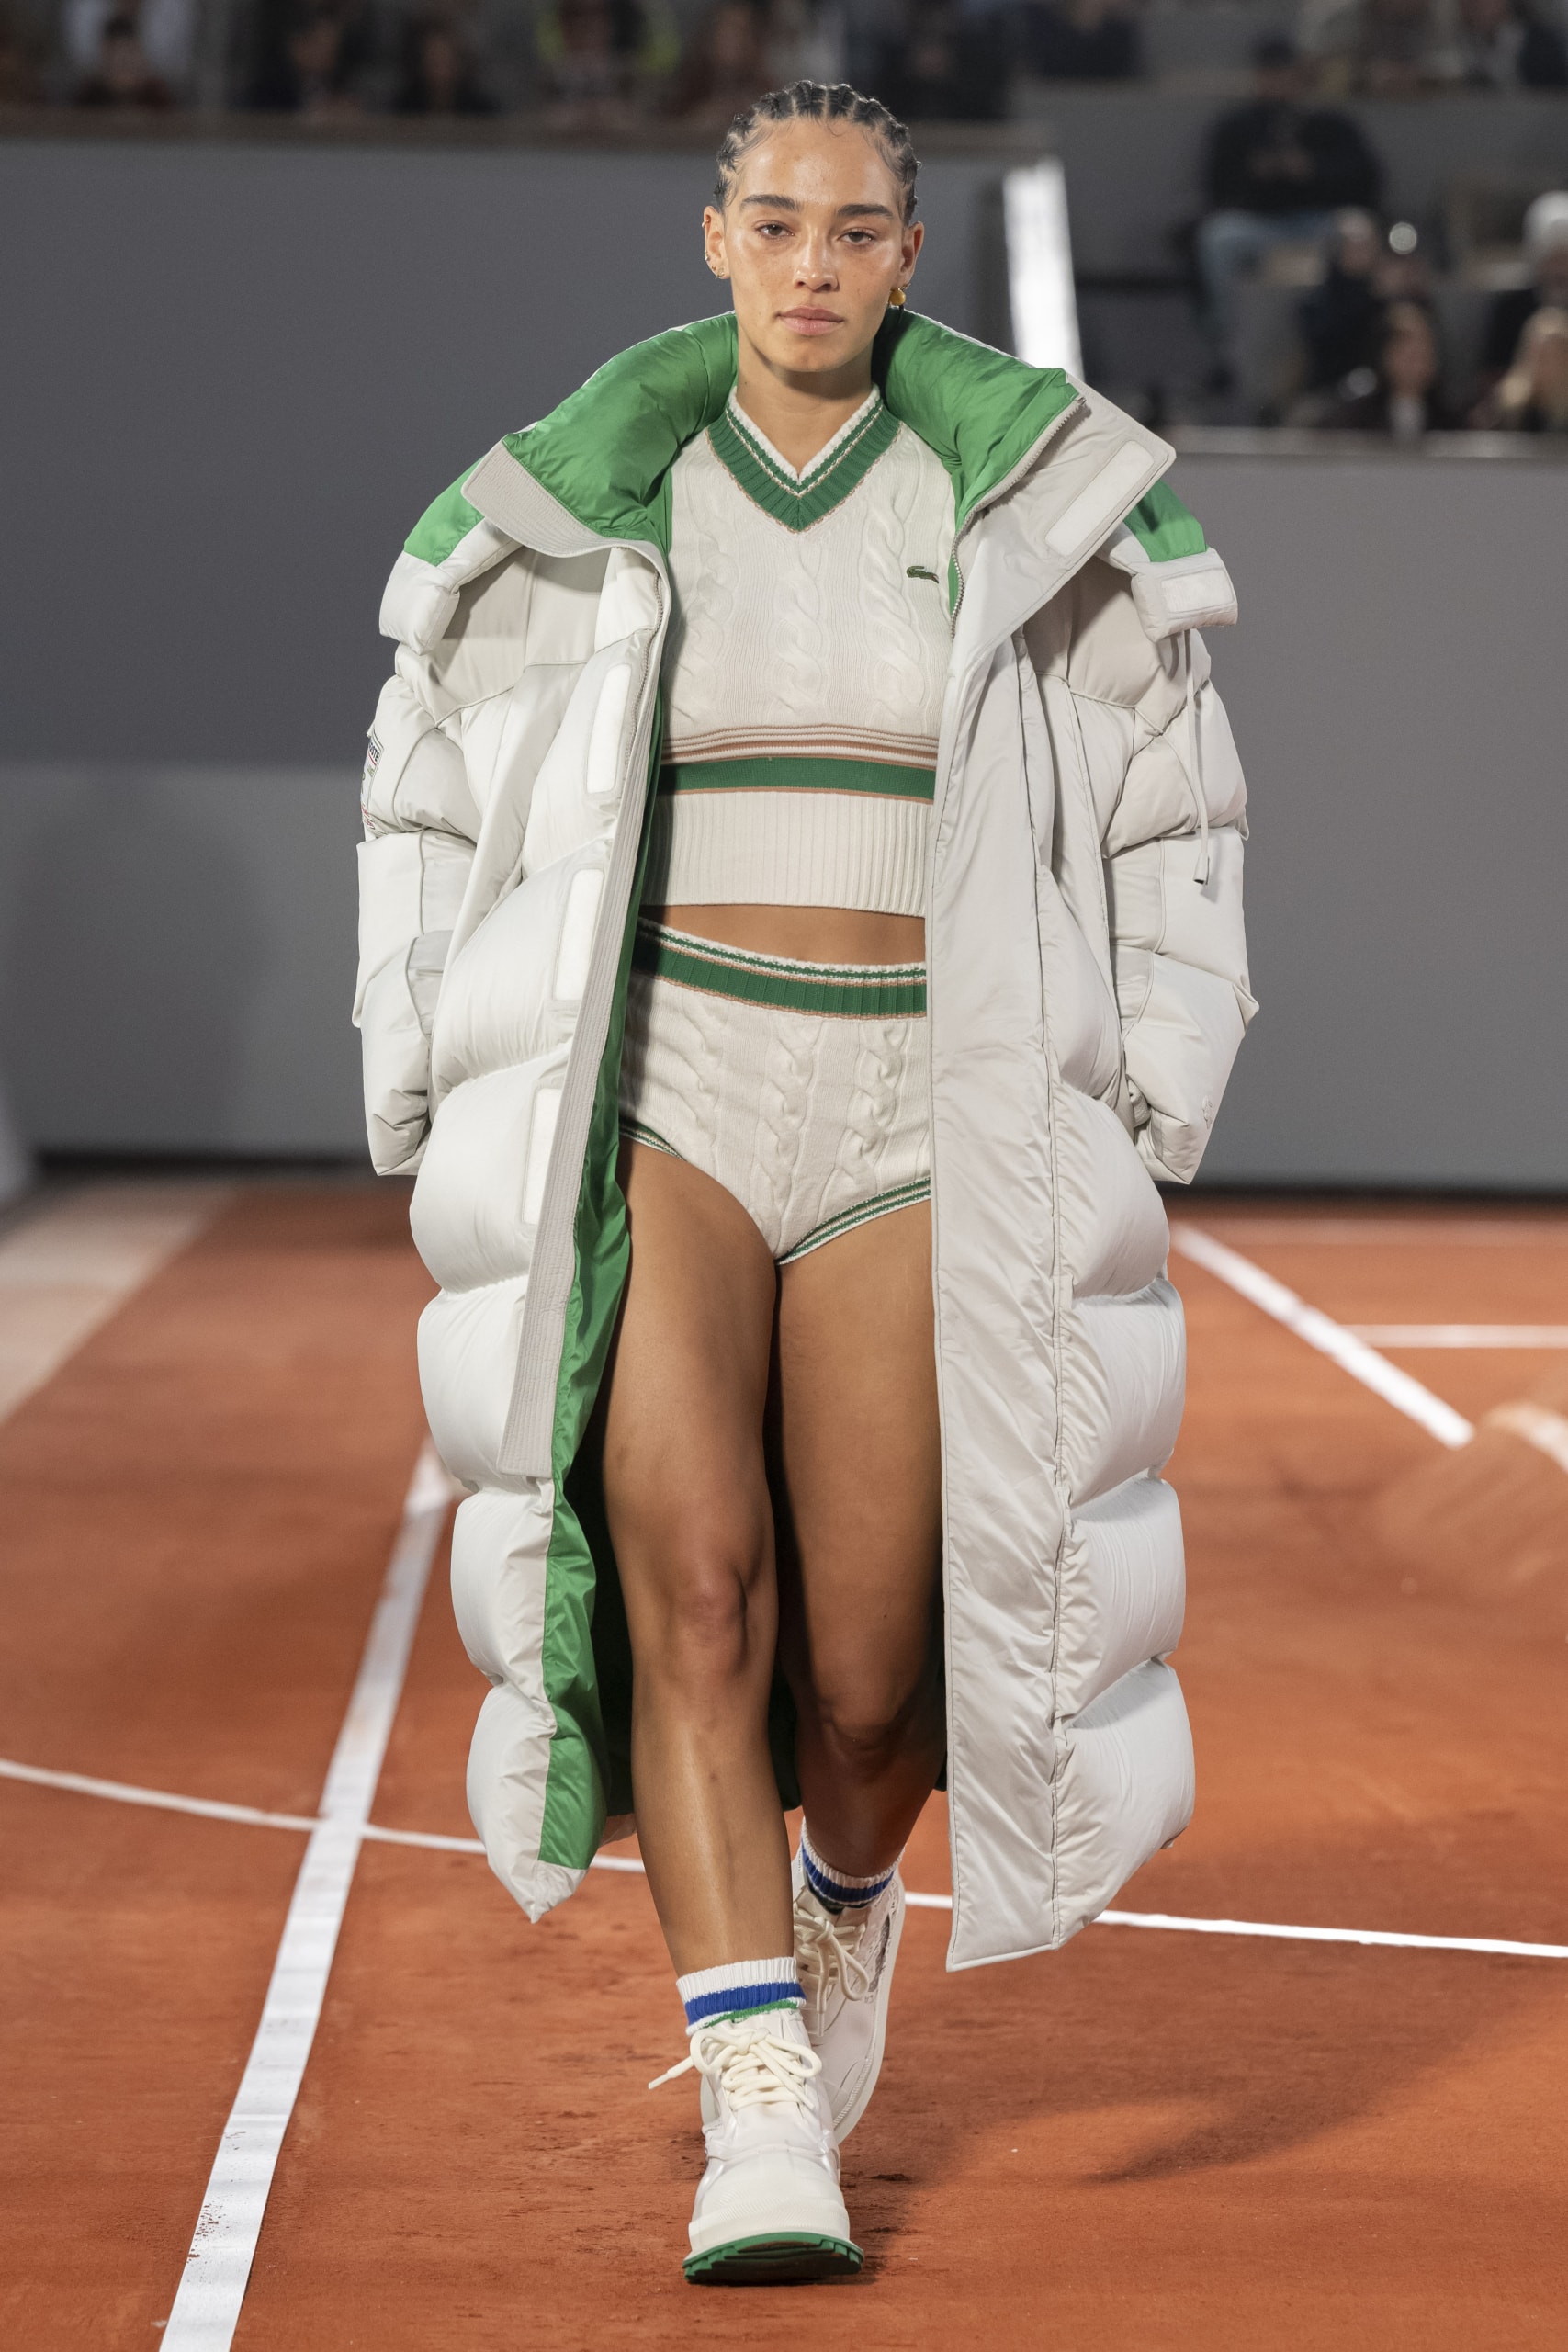 Why Tennis Leads Lacoste Into Fashion, Performance And Everyday Lifestyle